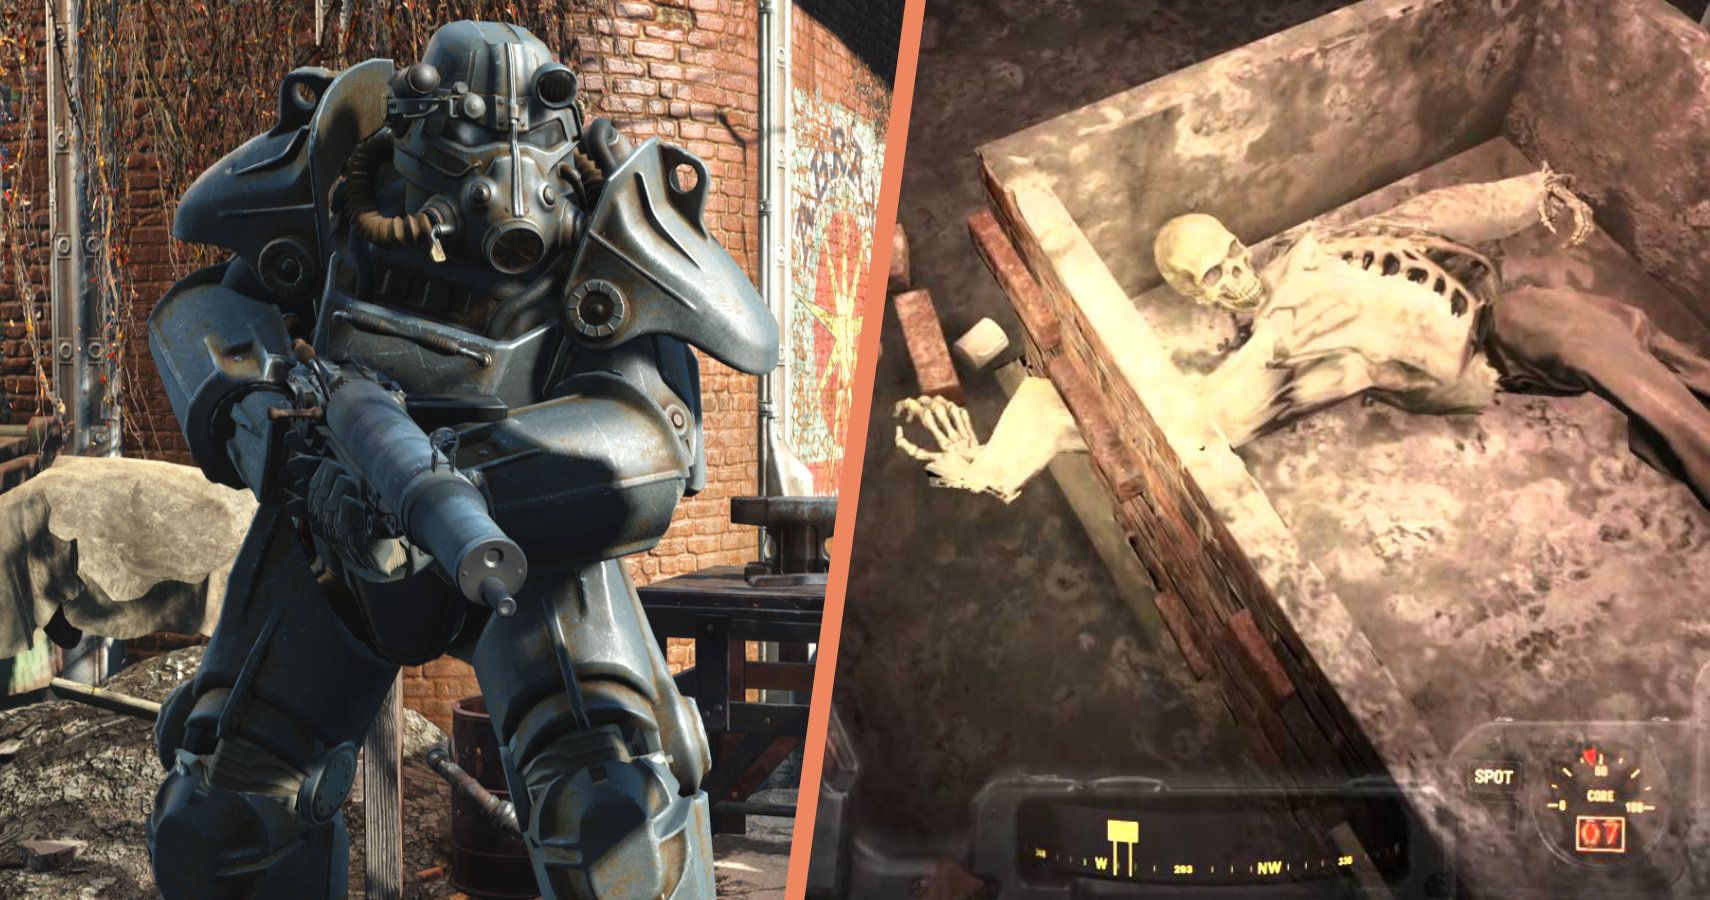 Fallout 4: The 10 Biggest Mistakes Gamers Make When Modding The Game